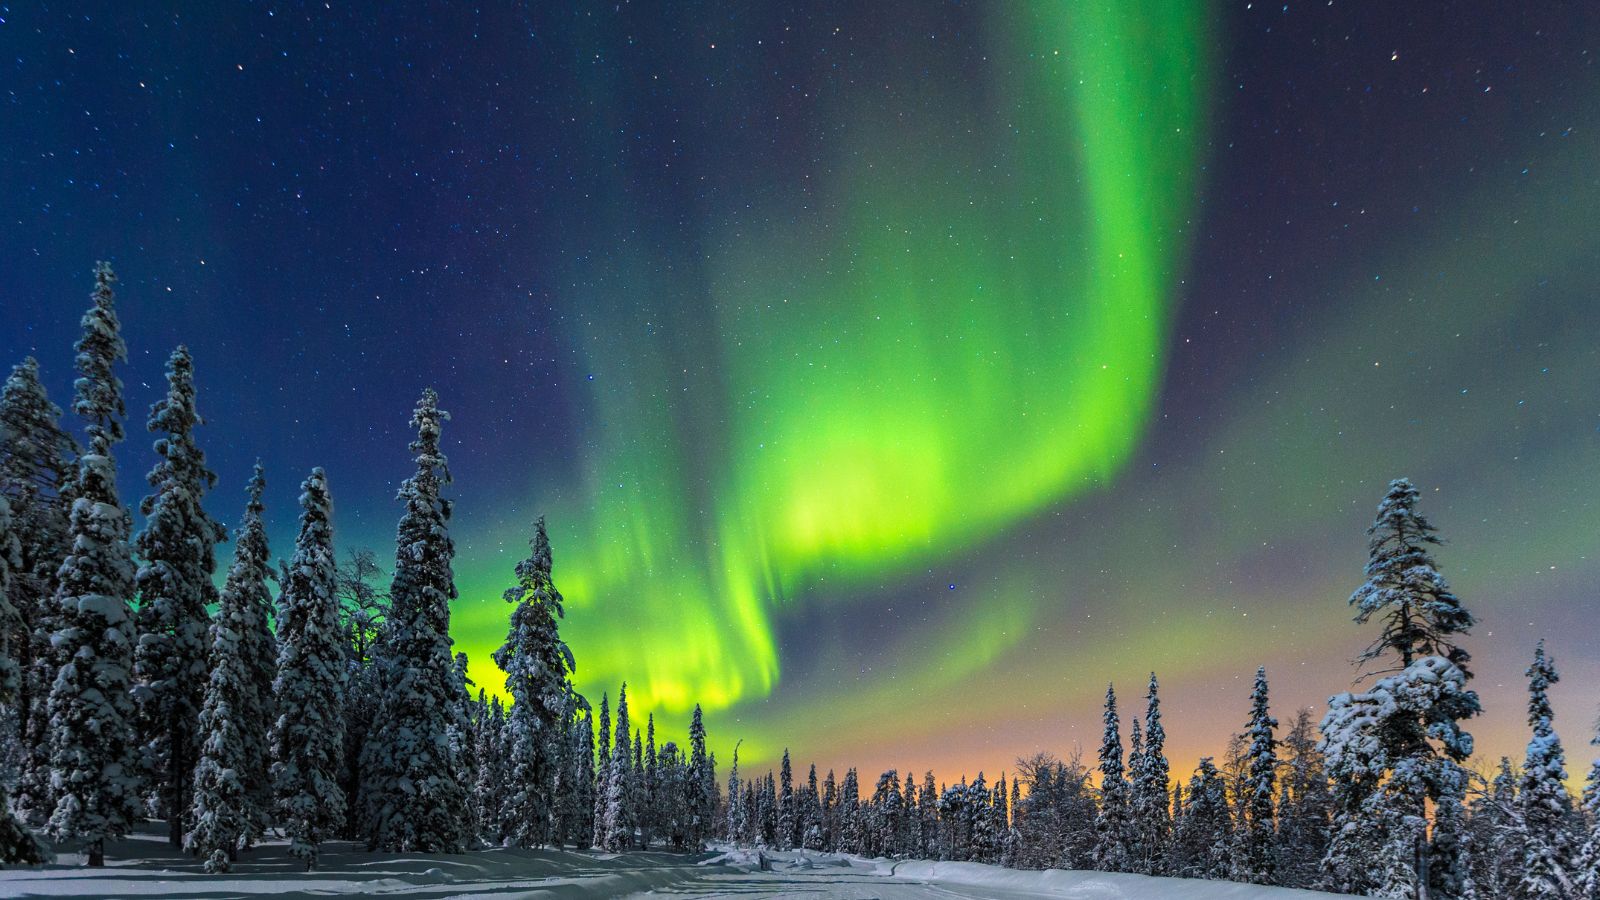 <p>Aurora Borealis, otherwise known as the Northern Lights is a gorgeous natural phenomenon that captures the intrigue and excitement of people young and old. If the thought of seeing ribbons of green and pink dancing across the dark sky makes you want to book a flight, these are the top destinations for viewing the Northern Lights.</p>